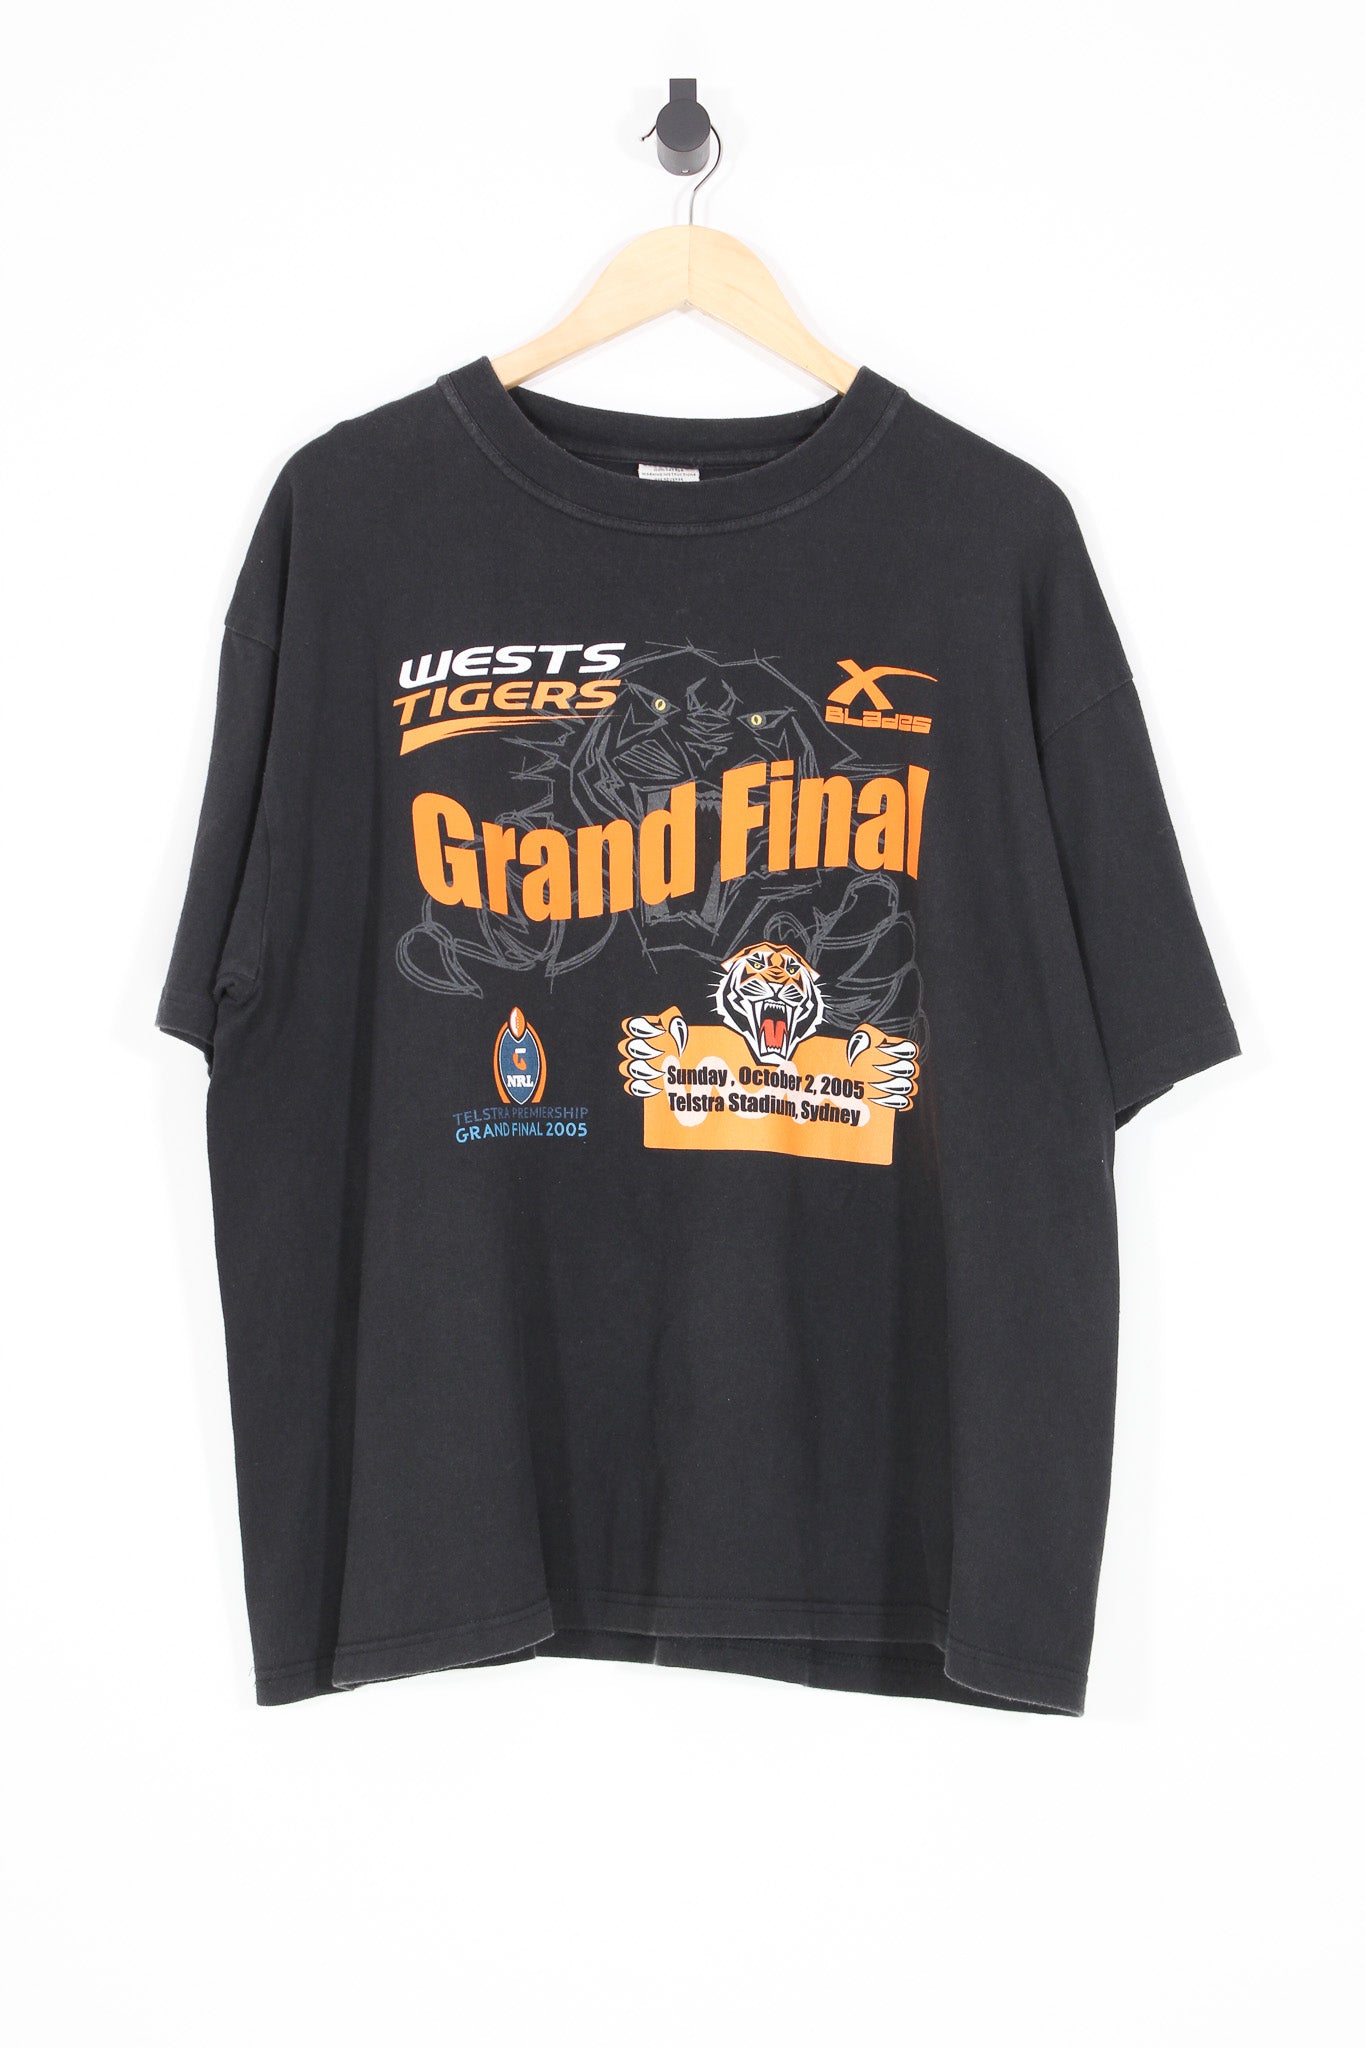 2005 Wests Tigers Grand Final NRL T-Shirt - L Oversized (Boxy)